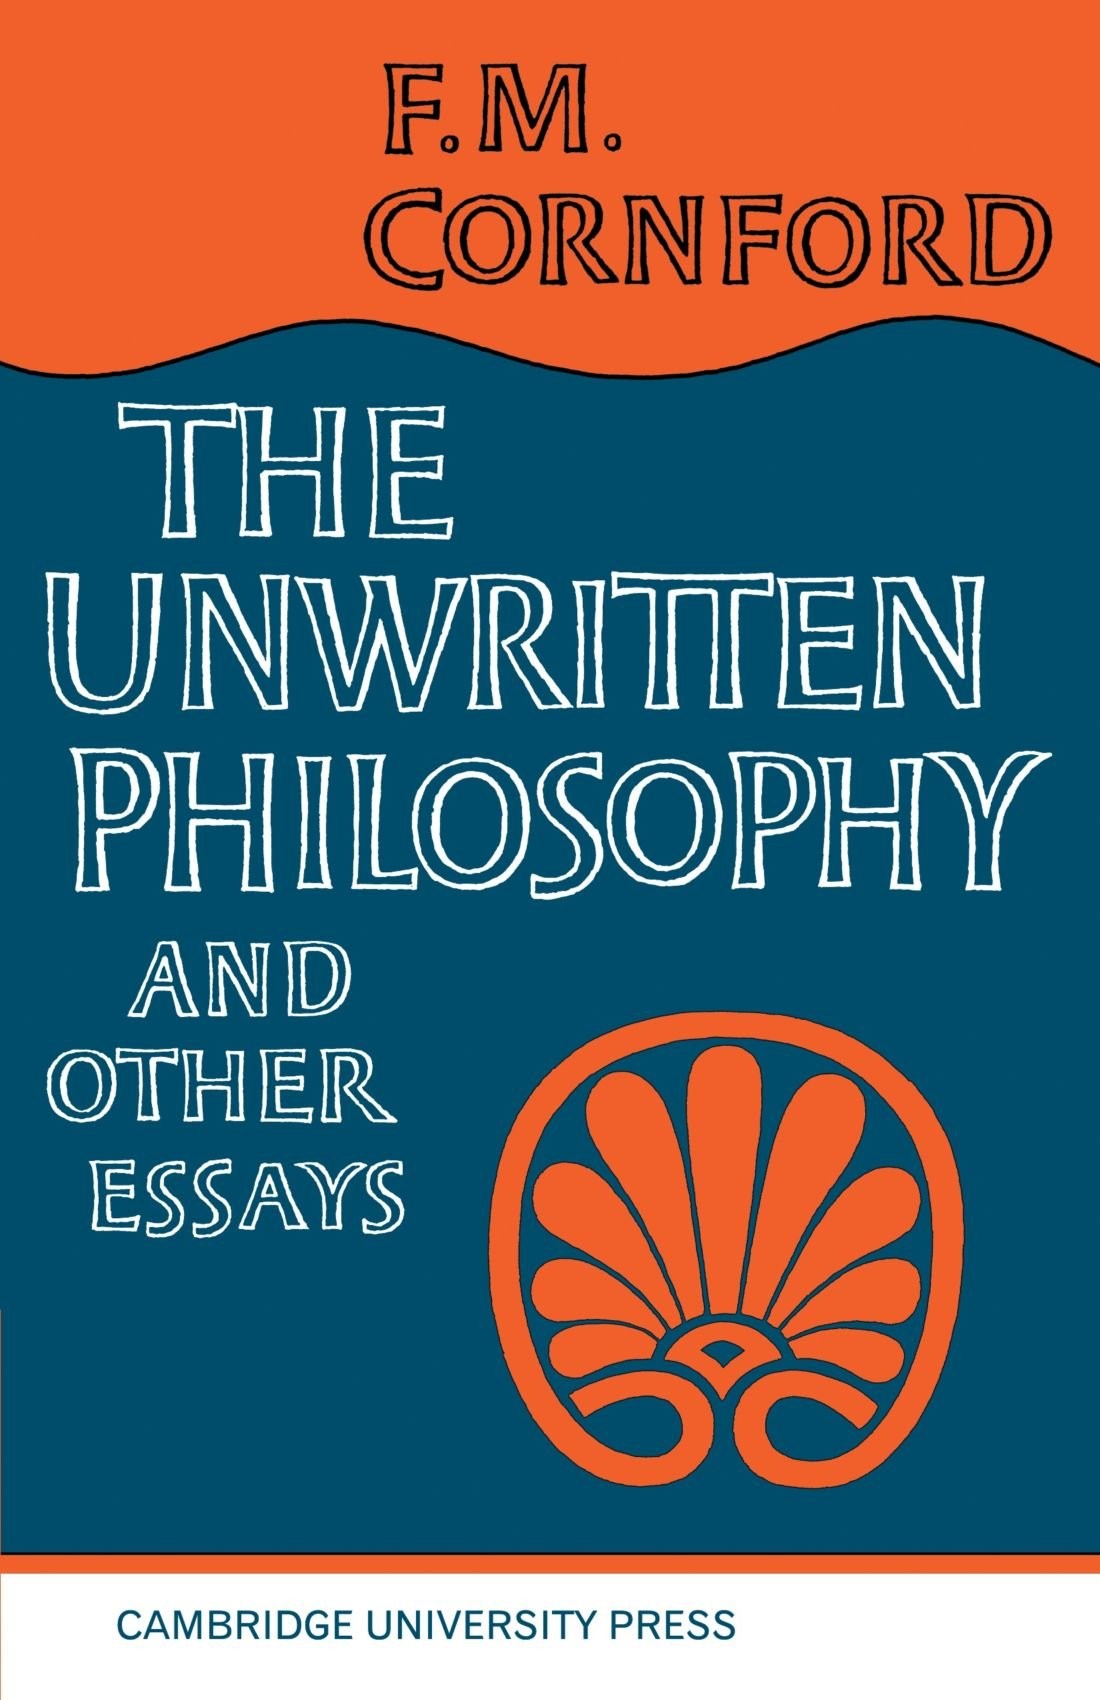 The Unwritten Philosophy and Other Essays